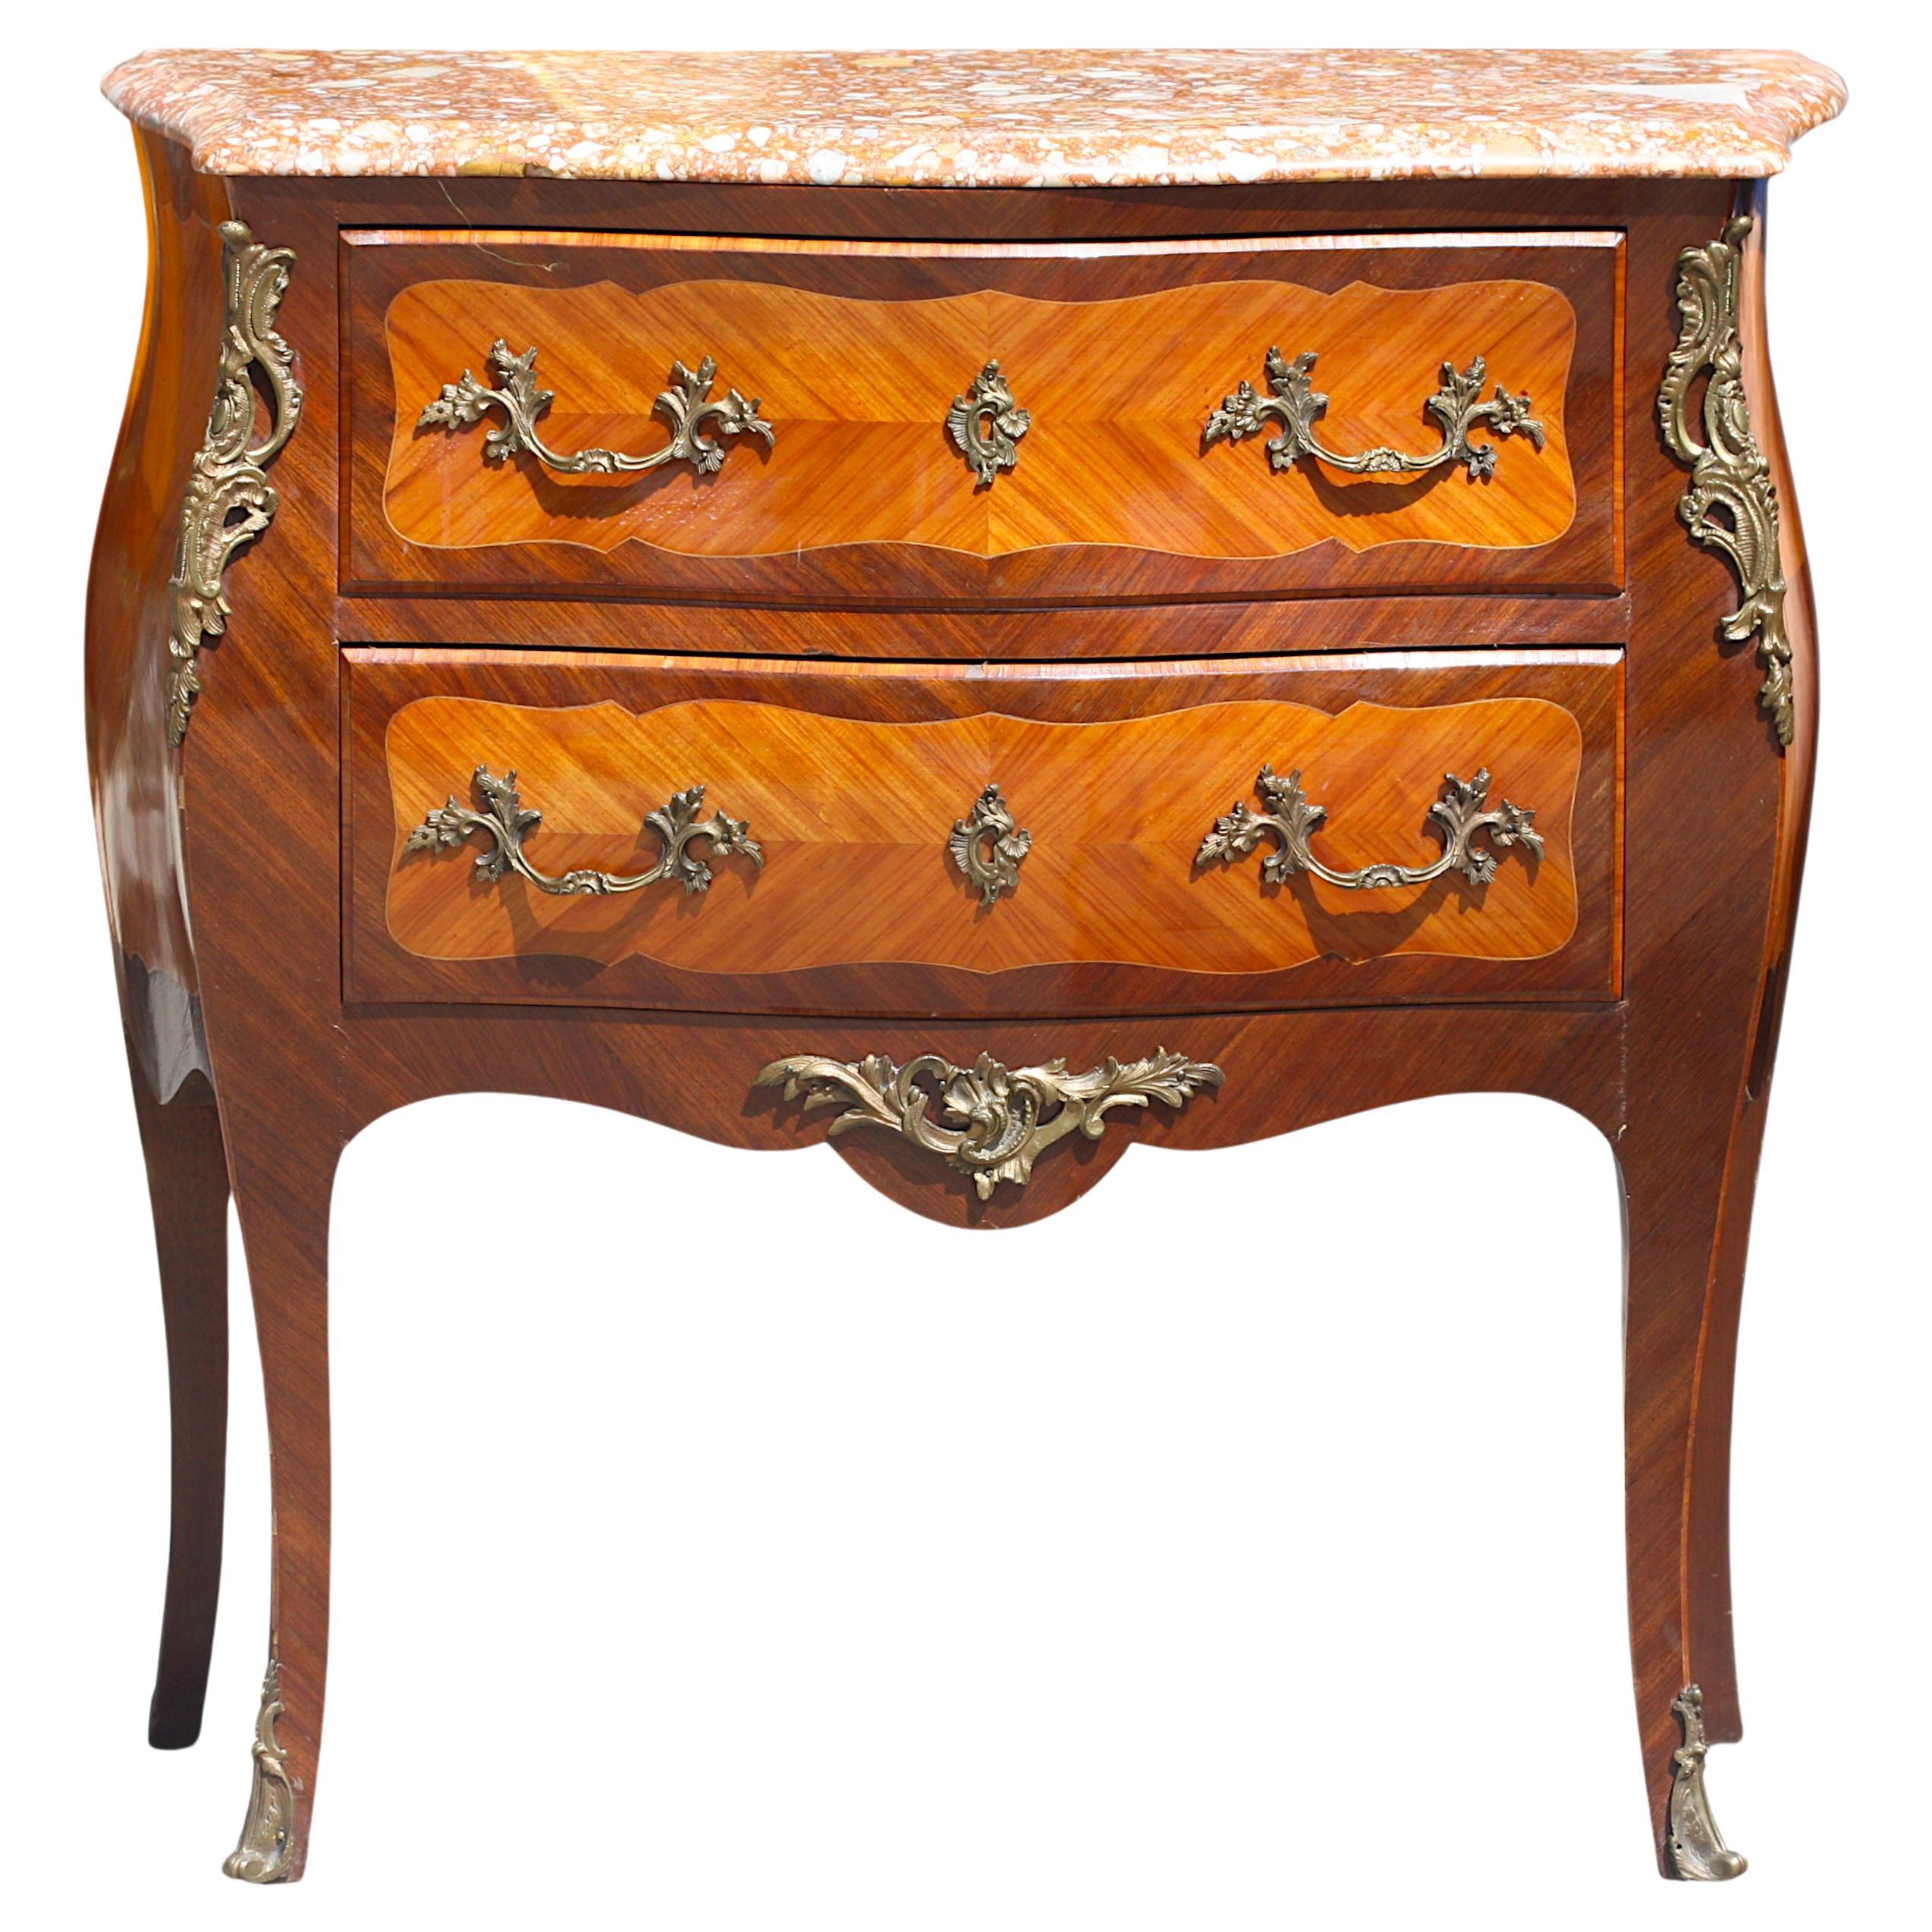 Louis XV Style Gilt-Bronze Mtd. Marble Top Fruitwood Marquetry Commode